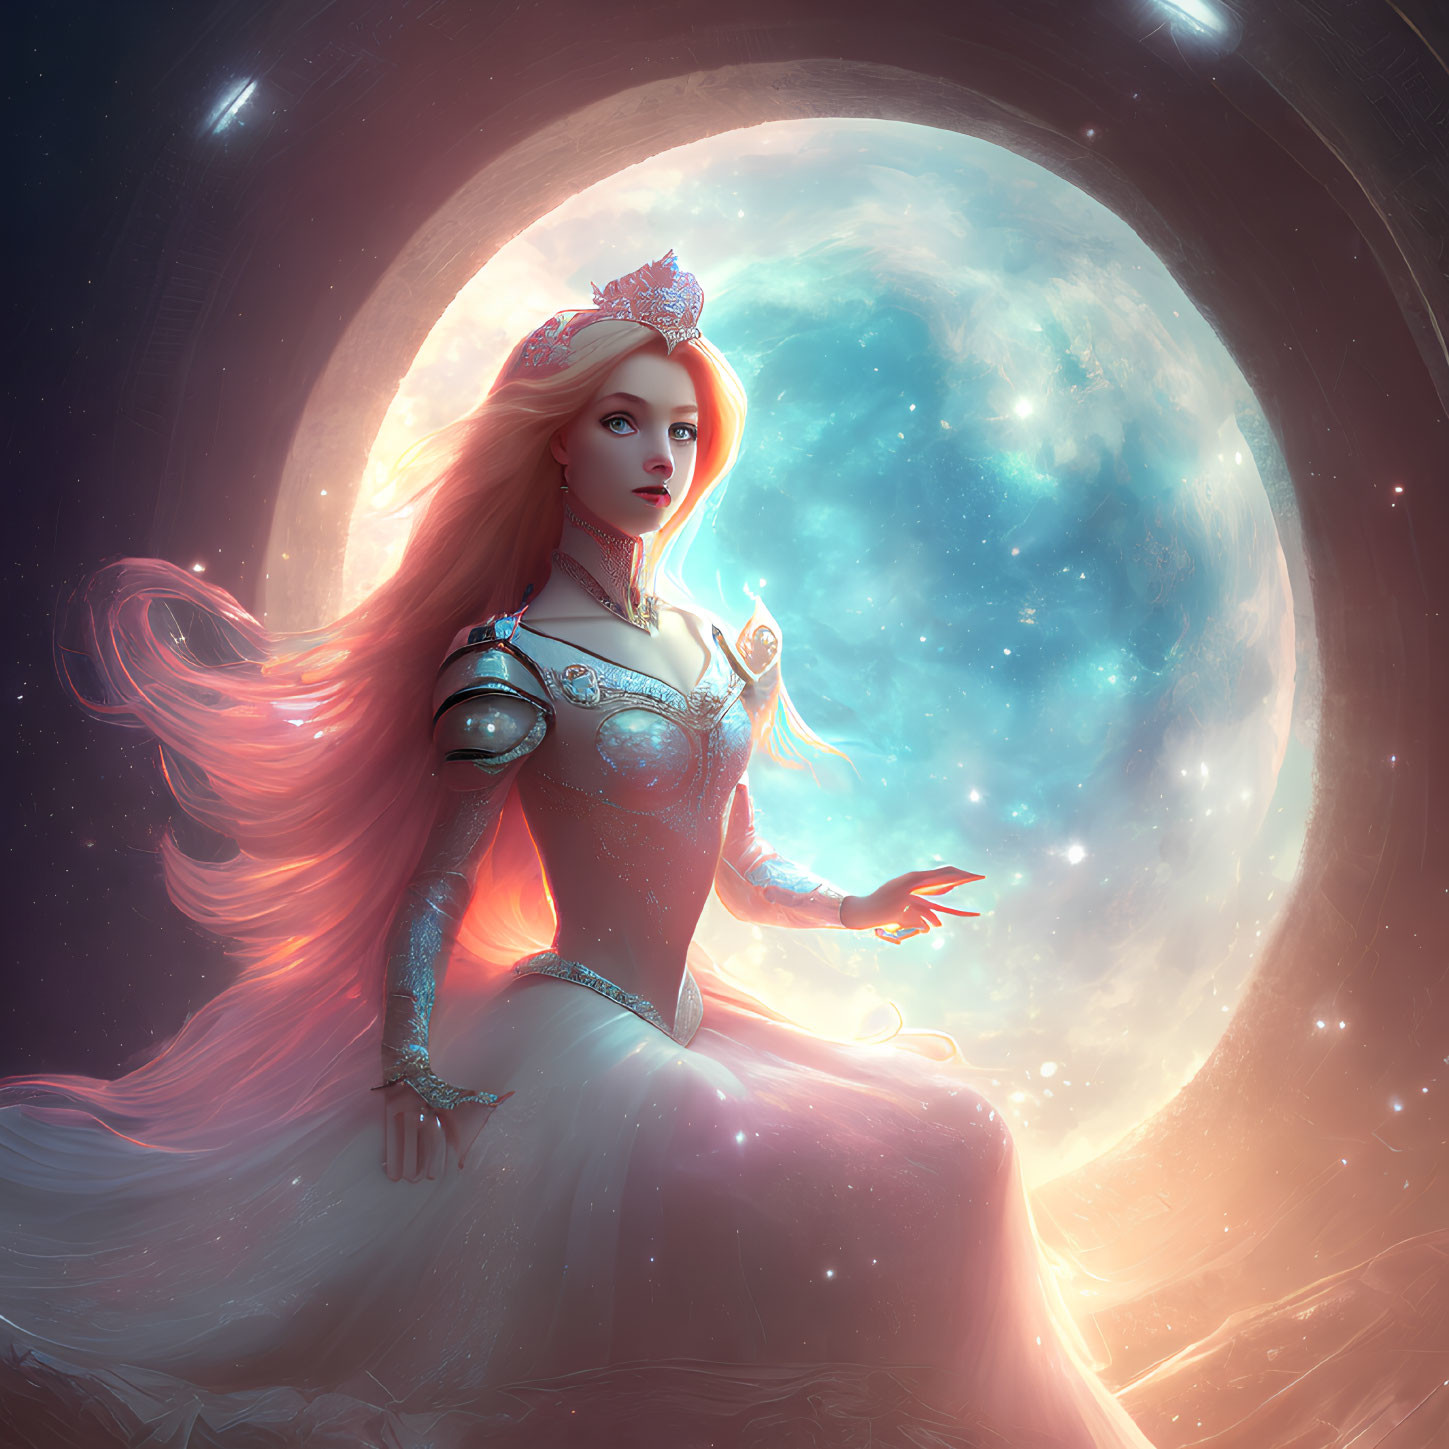 Cosmic fairytale princess with flowing hair and glowing halo in front of vivid blue planet